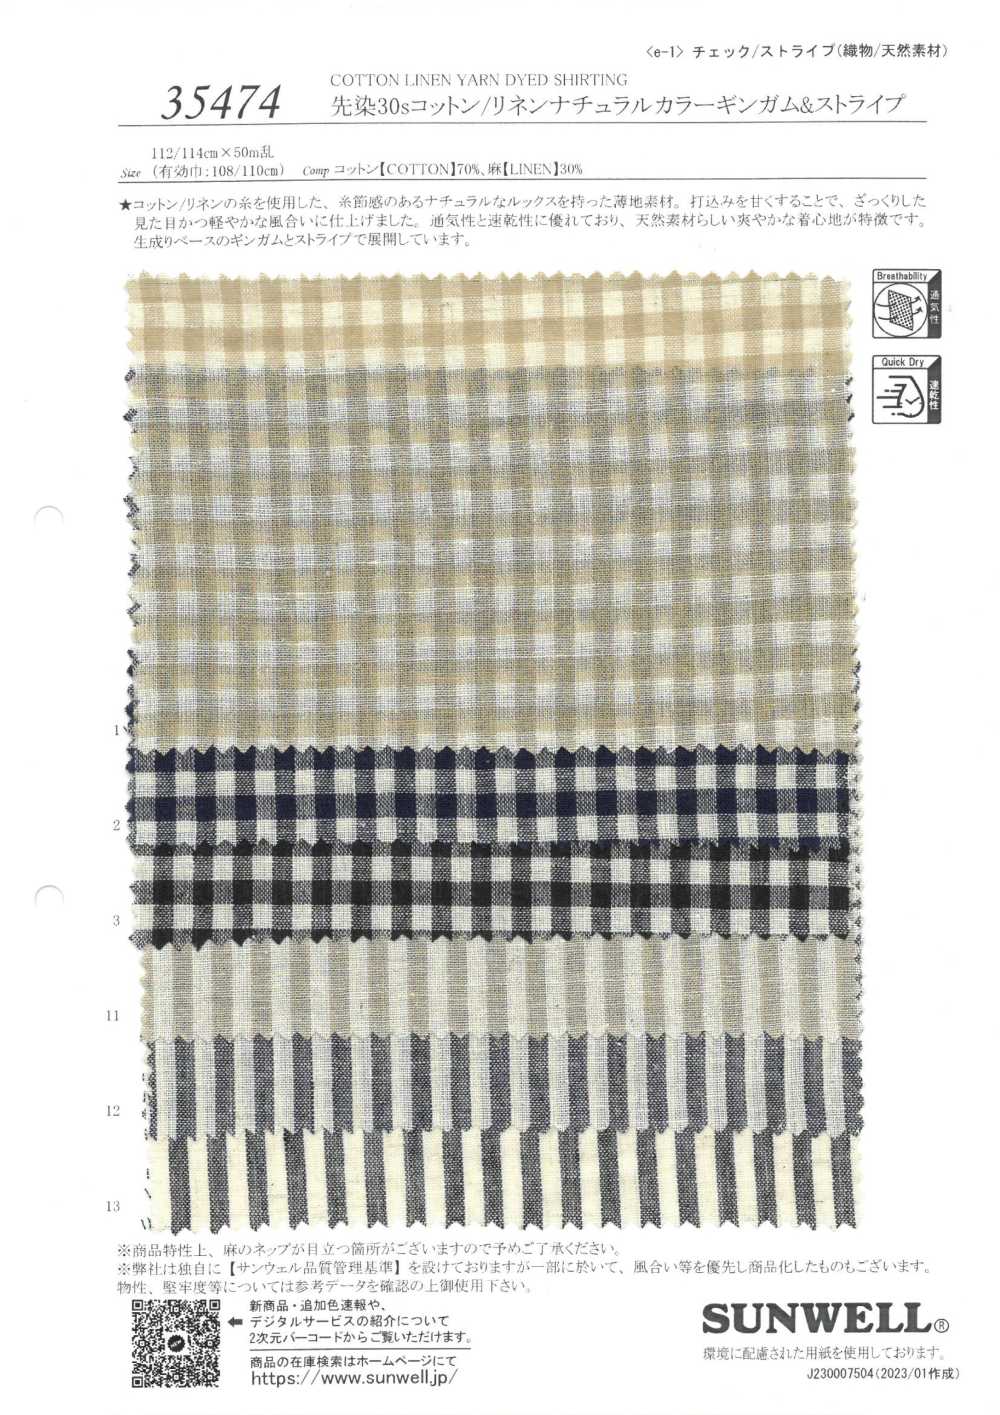 35474 Yarn Dyed 30 Single Thread Cotton/linen Natural Color Gingham & Stripes[Textile / Fabric] SUNWELL